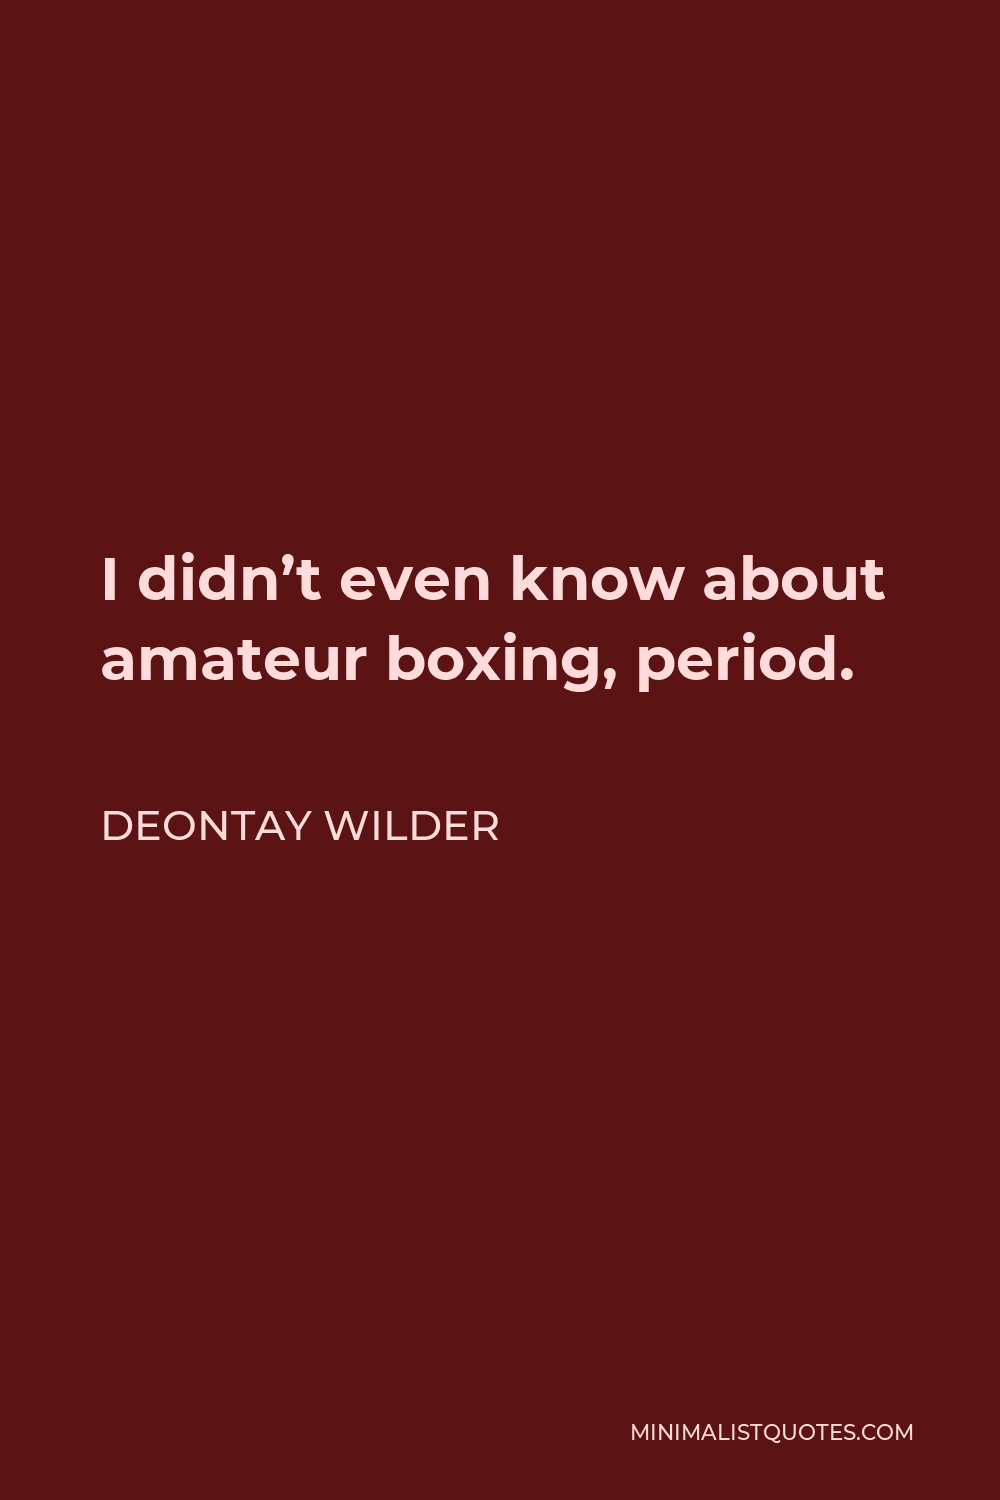 Deontay Wilder Quote - I didn’t even know about amateur boxing, period.